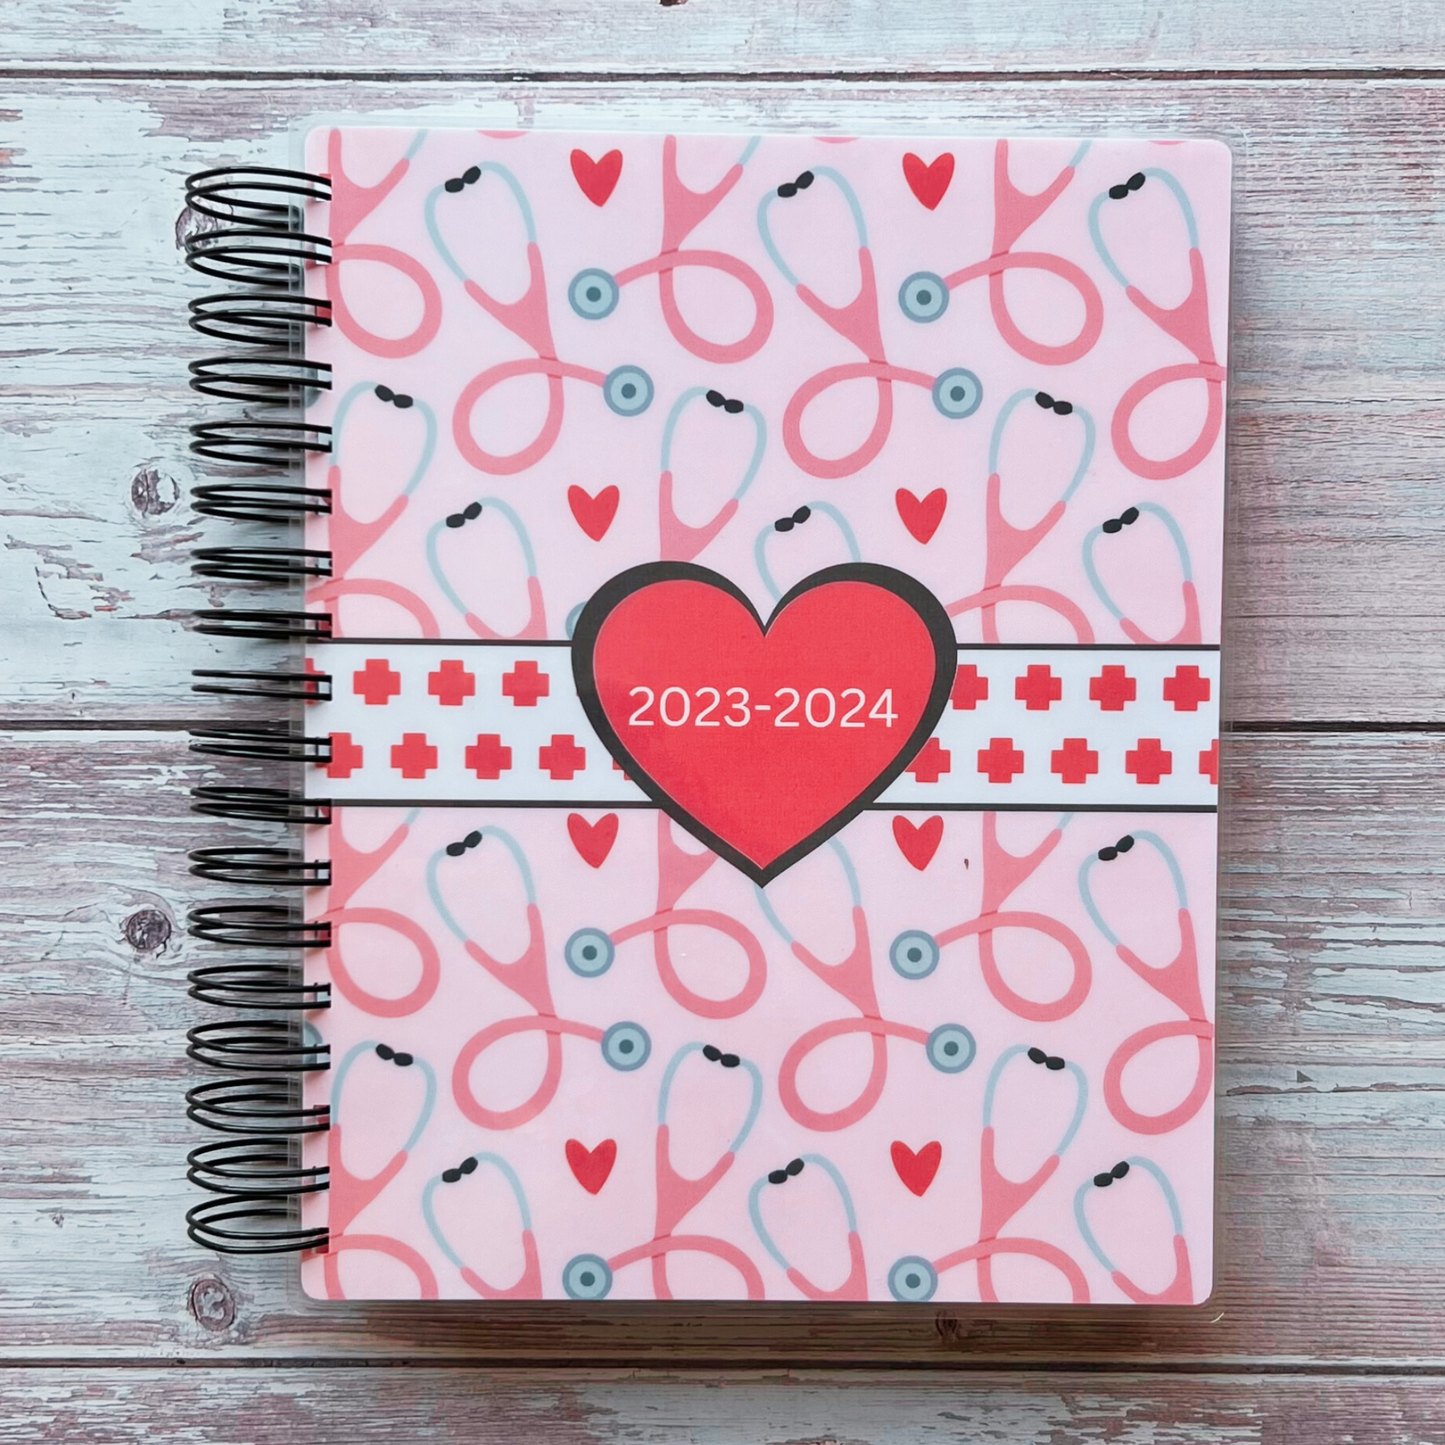 2023-2024 Personalized Monthly Planner - Nurse Life Monthly Planners Artful Planner Co. July-2023 20 Meal Planner Pages added to back +$3.00 